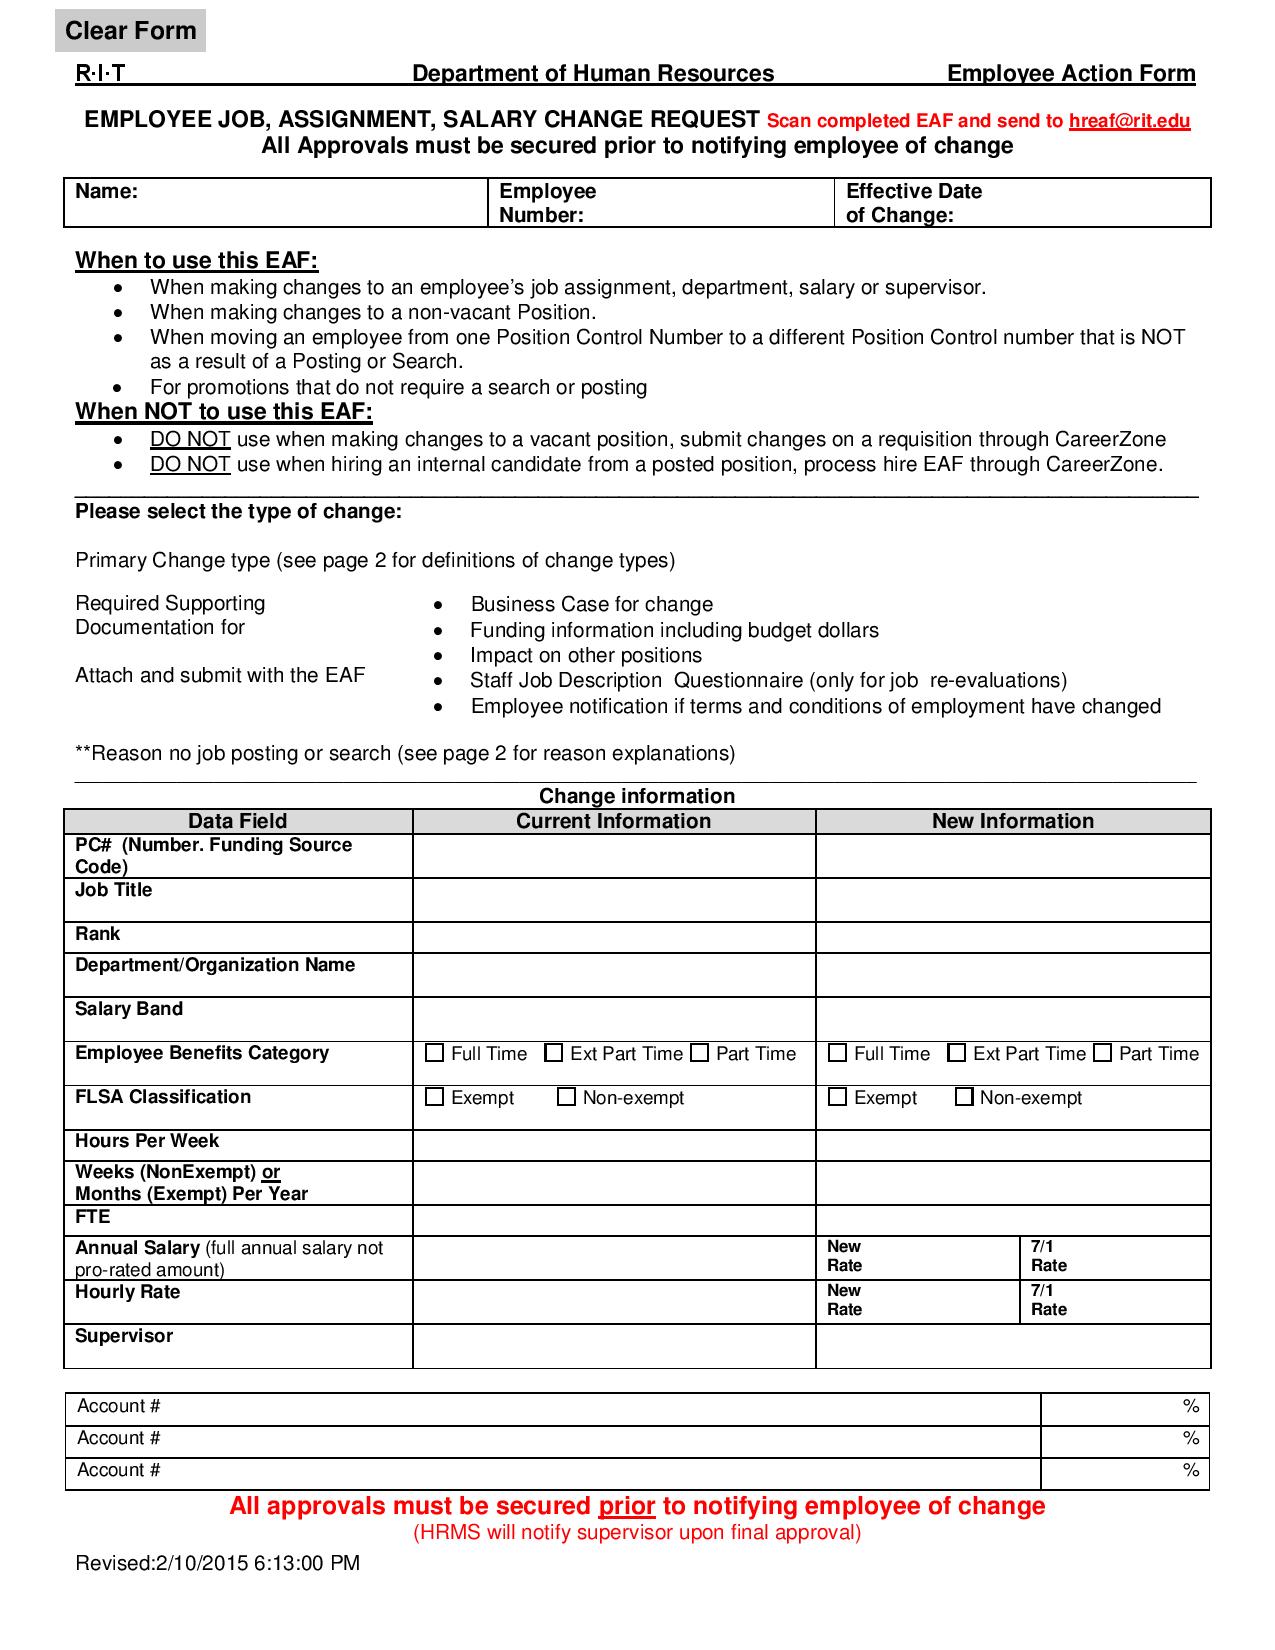 employee action form 1 page 001